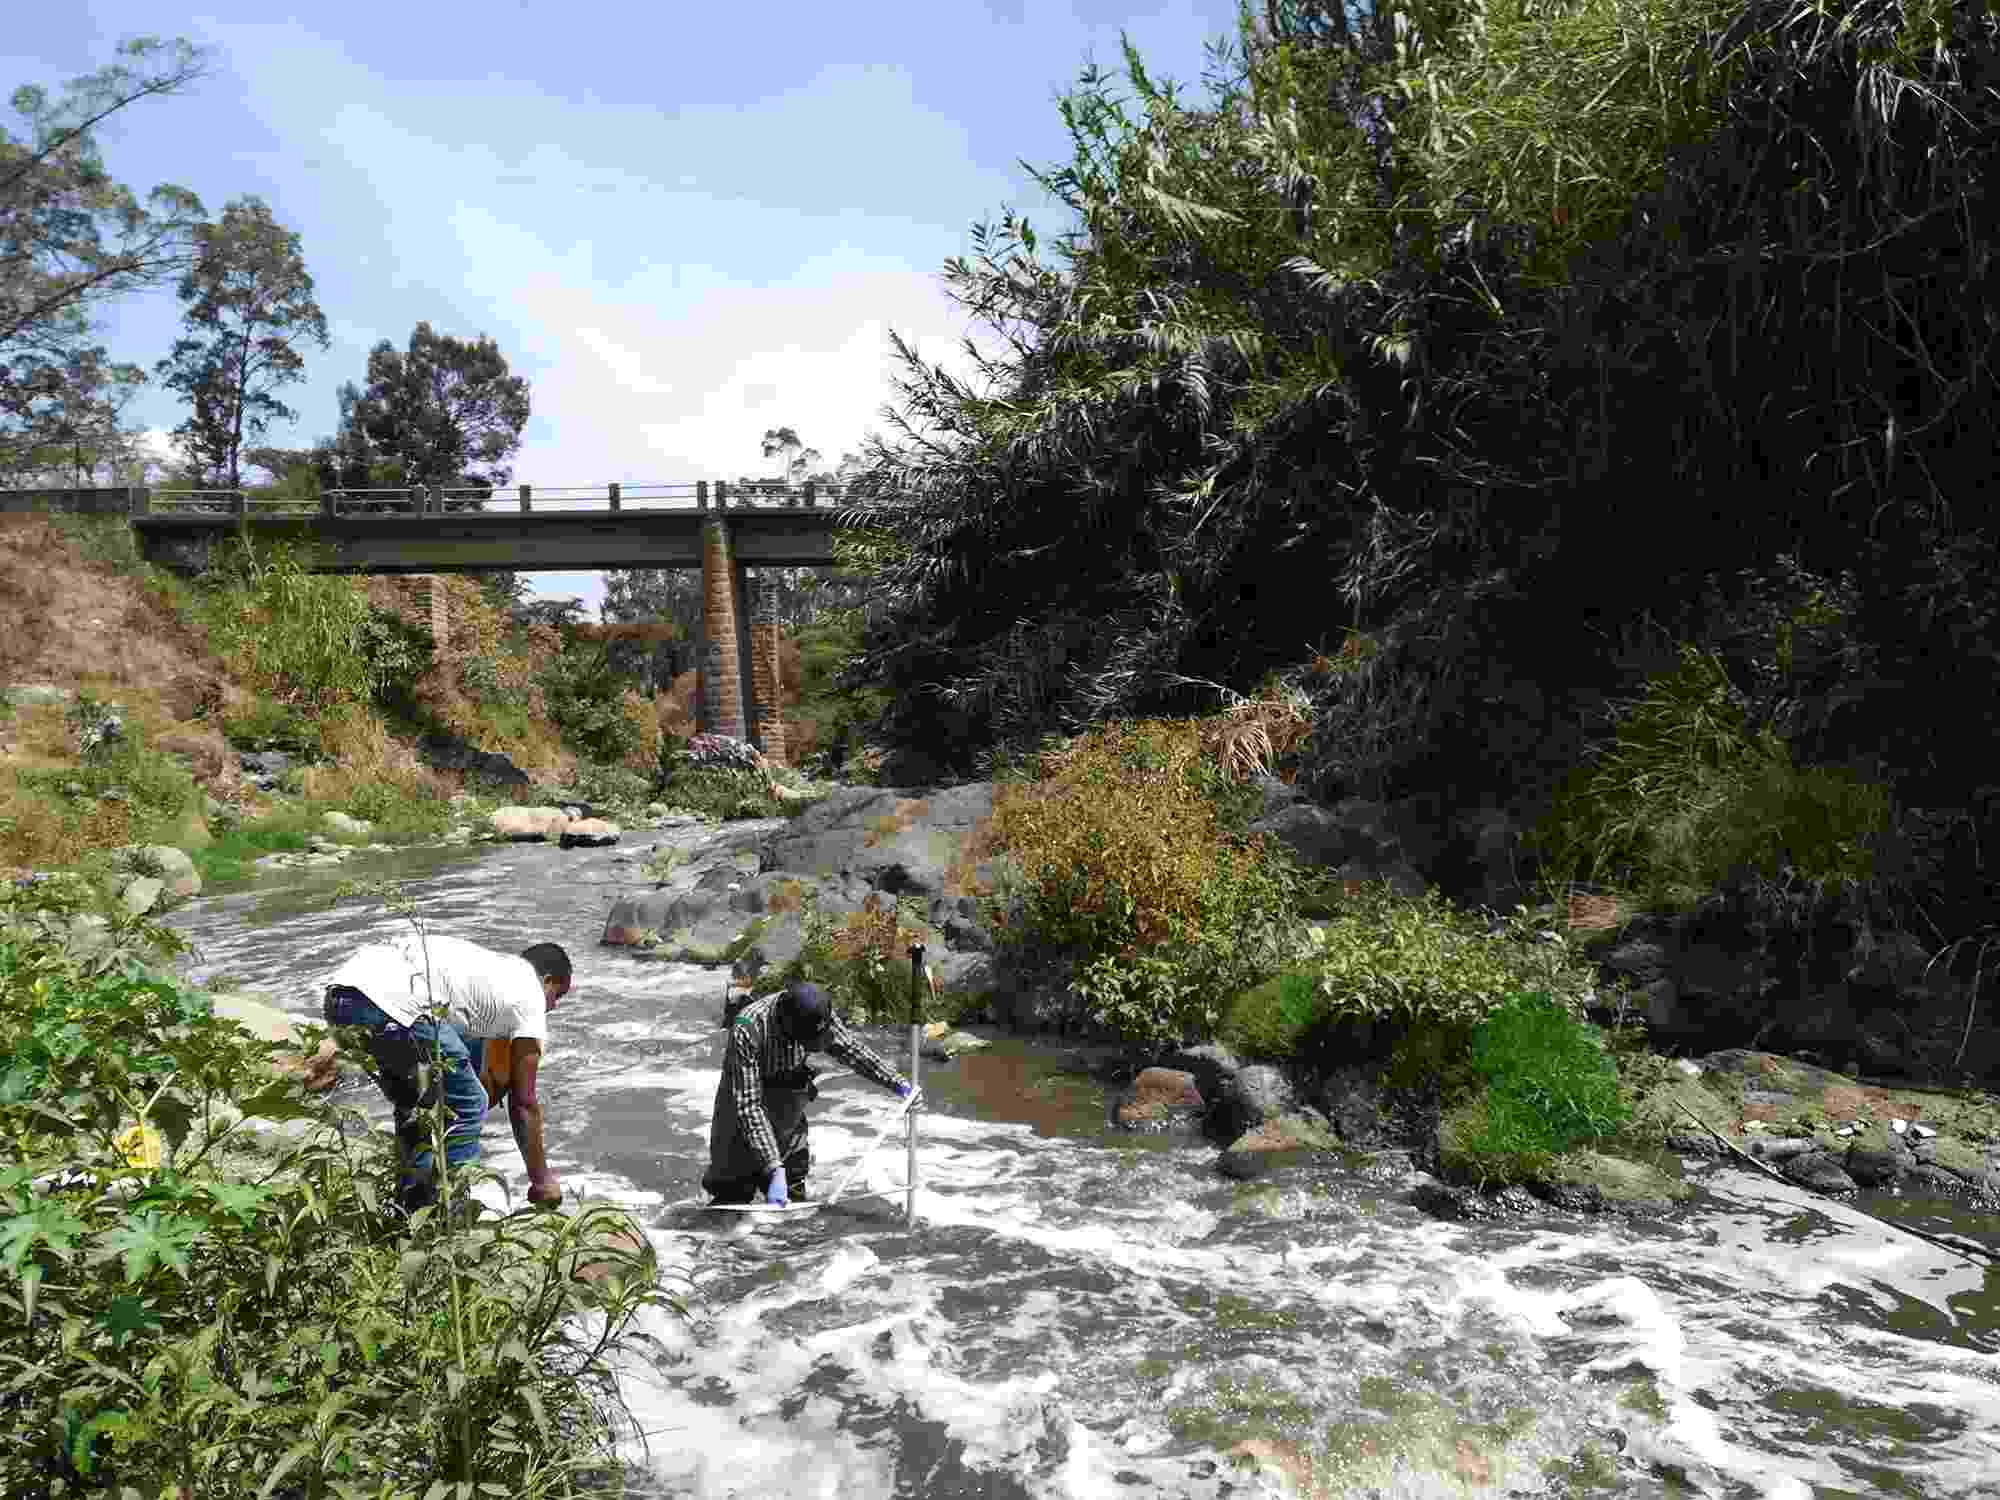 Two Hub colleagues collect water samples from the Akaki River, which flows downstream under a bridge and past rocks and trees